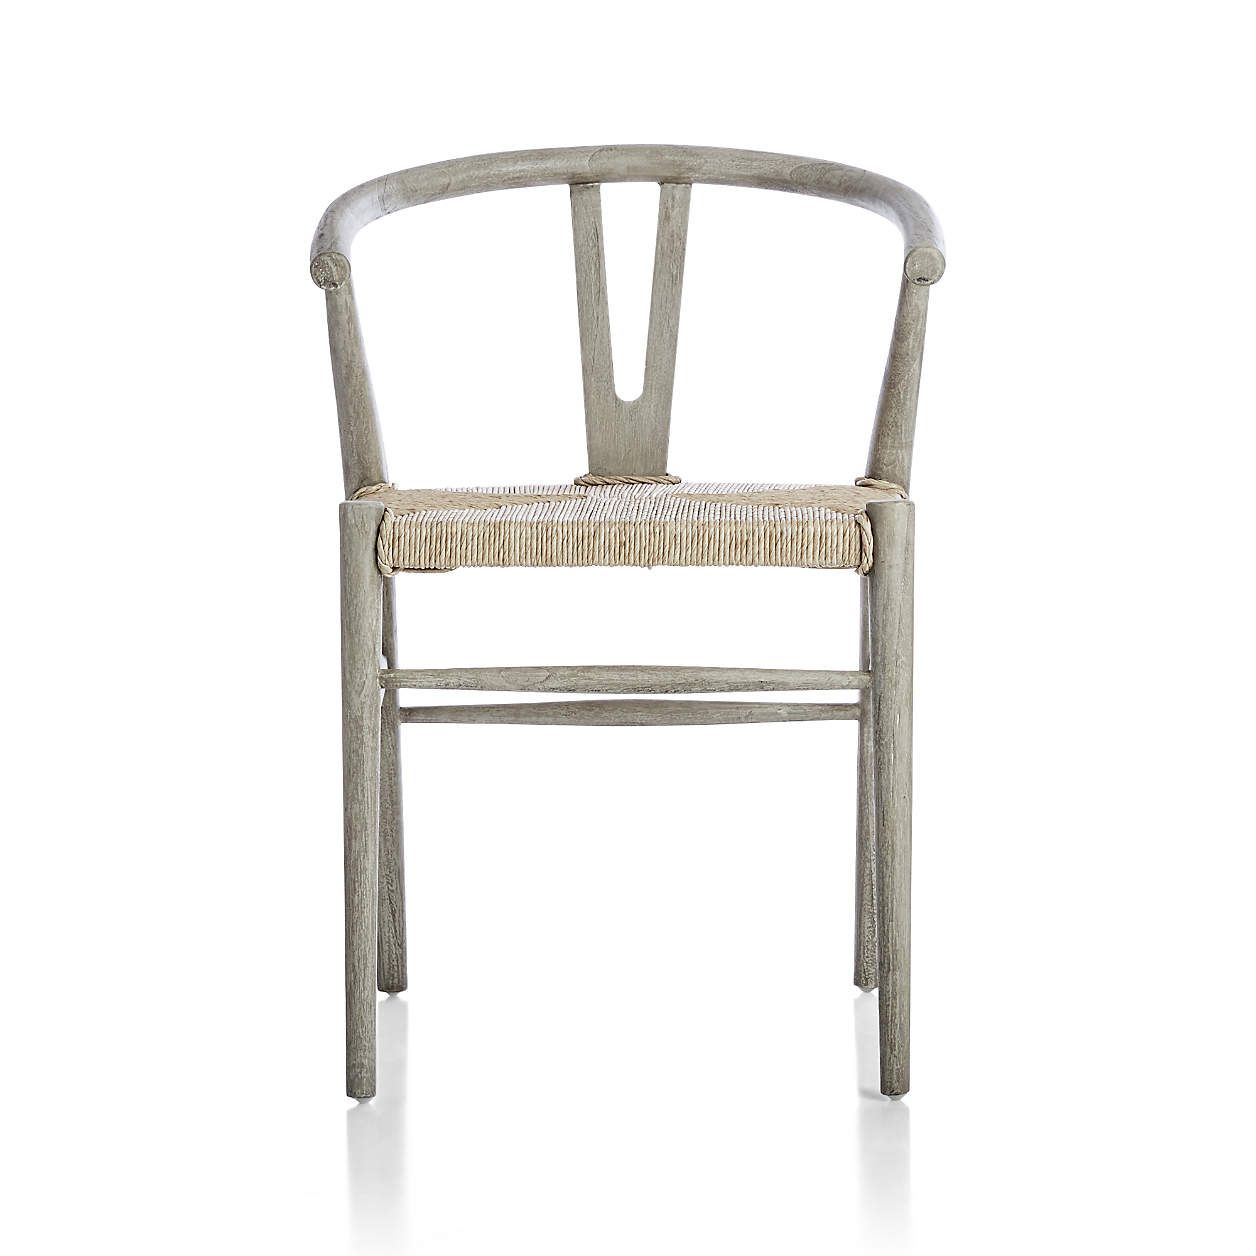 Crescent Weathered Grey Wood Wishbone Dining Chair + Reviews | Crate & Barrel | Crate & Barrel